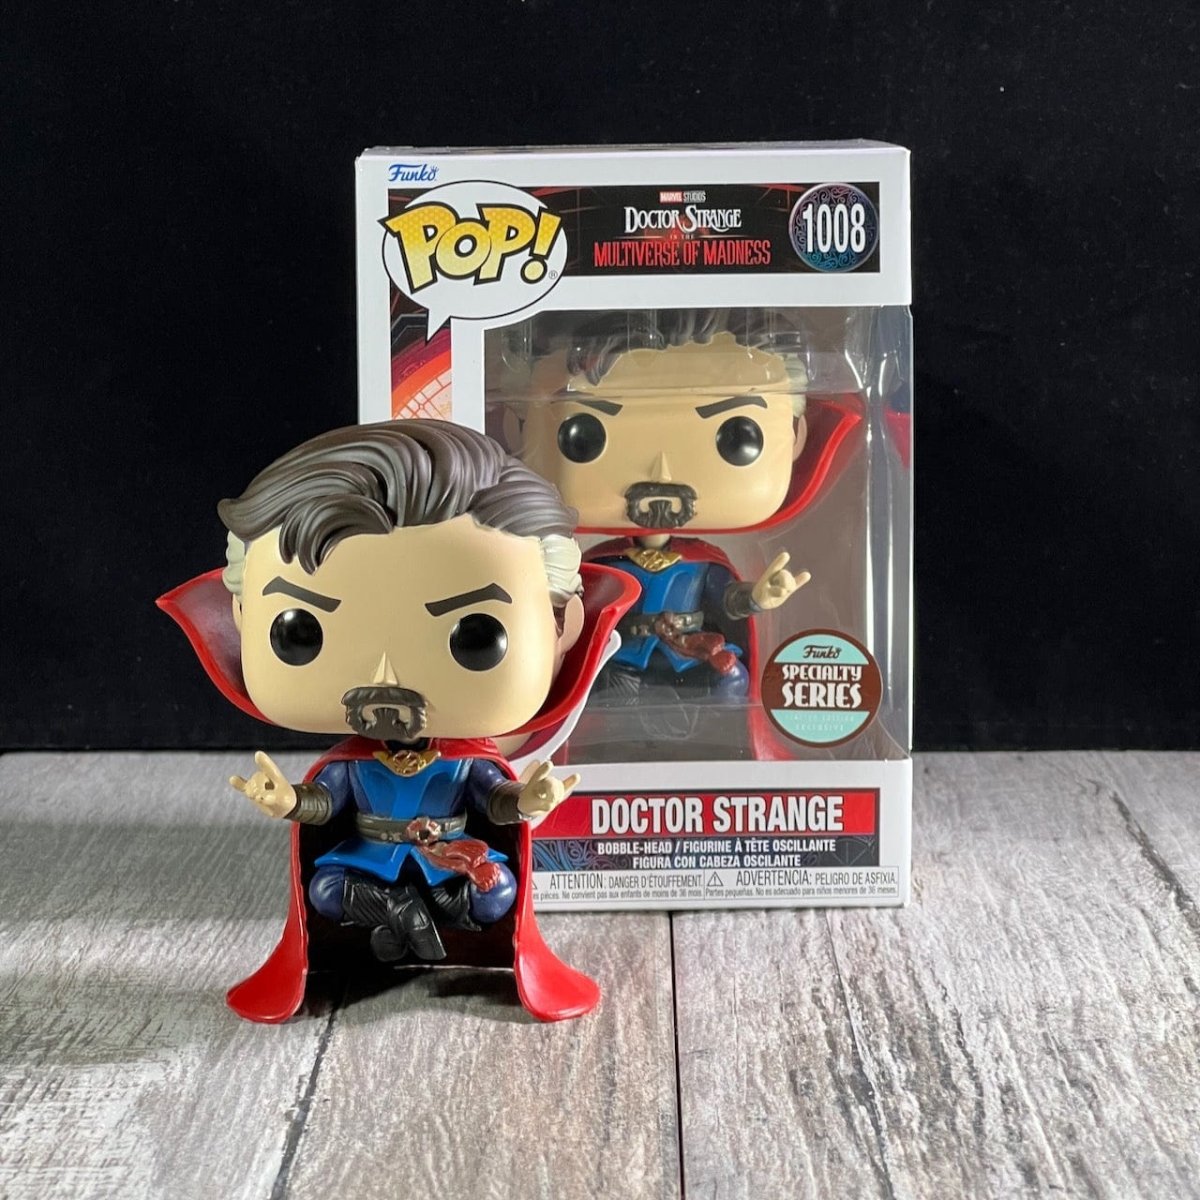 Funko POP! Marvel - Doctor Strange in the Multiverse of Madness #1008 - Specialty Series Pop-O-Loco